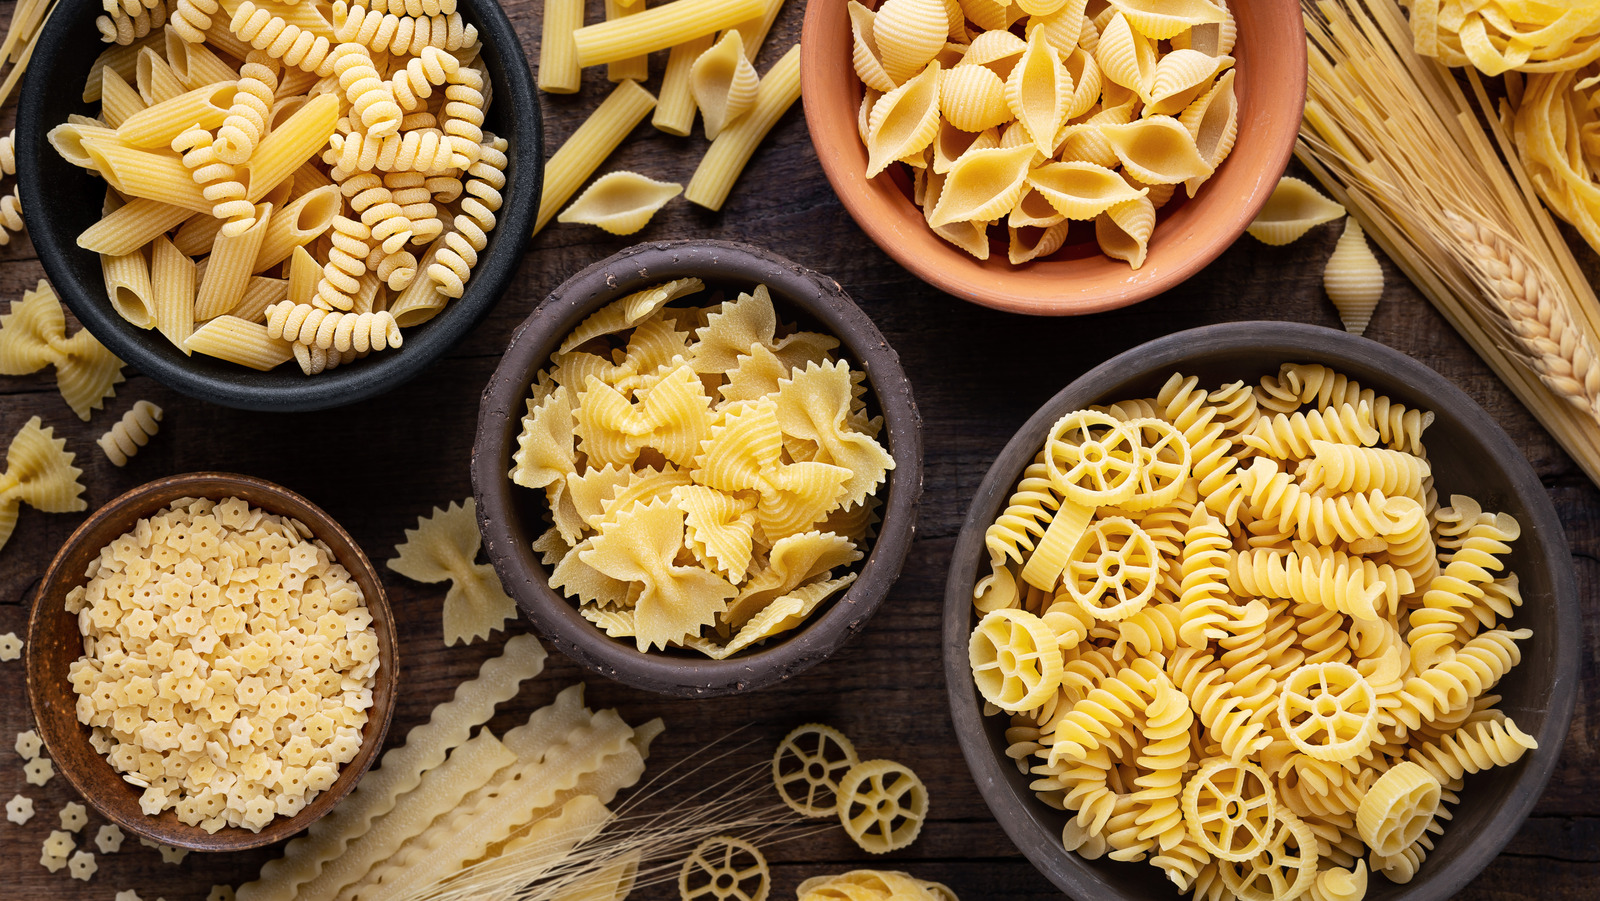 https://www.thedailymeal.com/img/gallery/the-ultimate-guide-to-pasta-shapes/l-the-ultimate-guide-to-pasta-shapes-1680042740.jpg